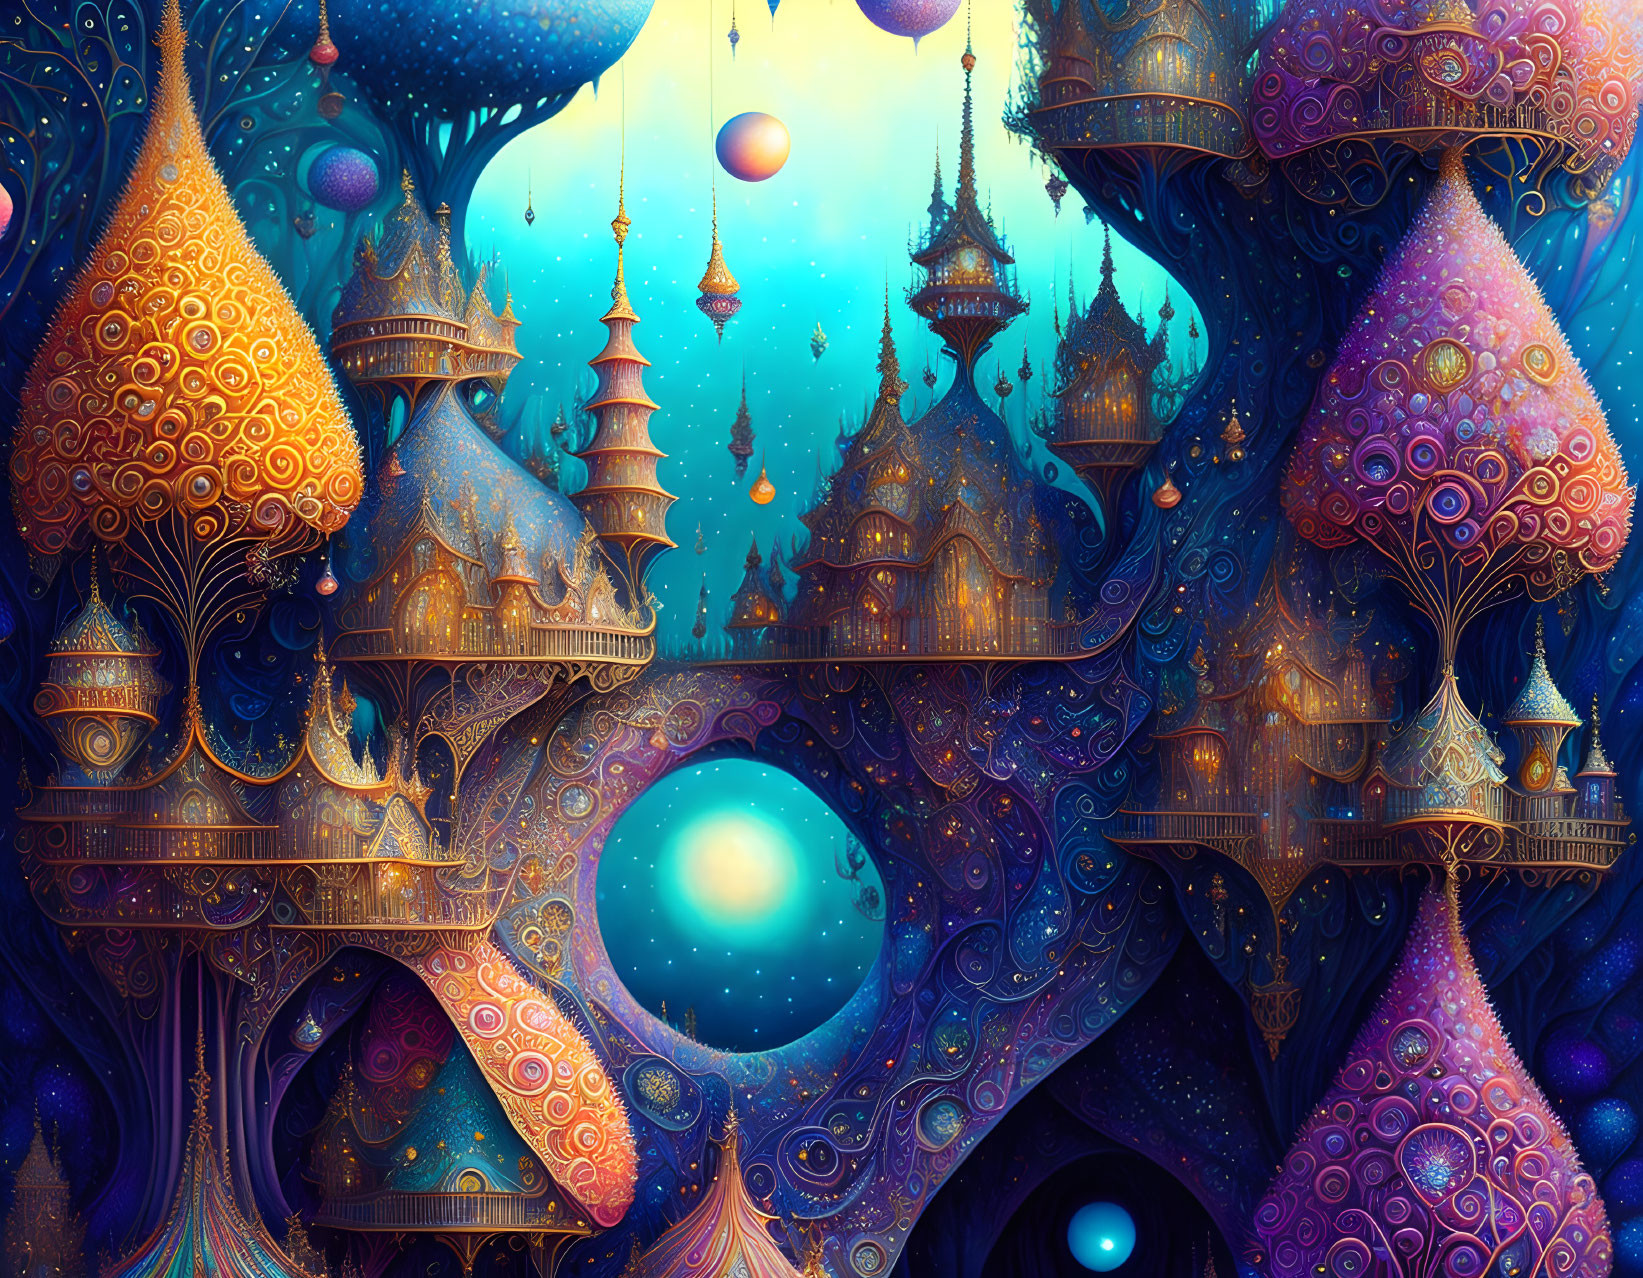 Fantastical landscape with ornate spire-like structures and floating orbs.